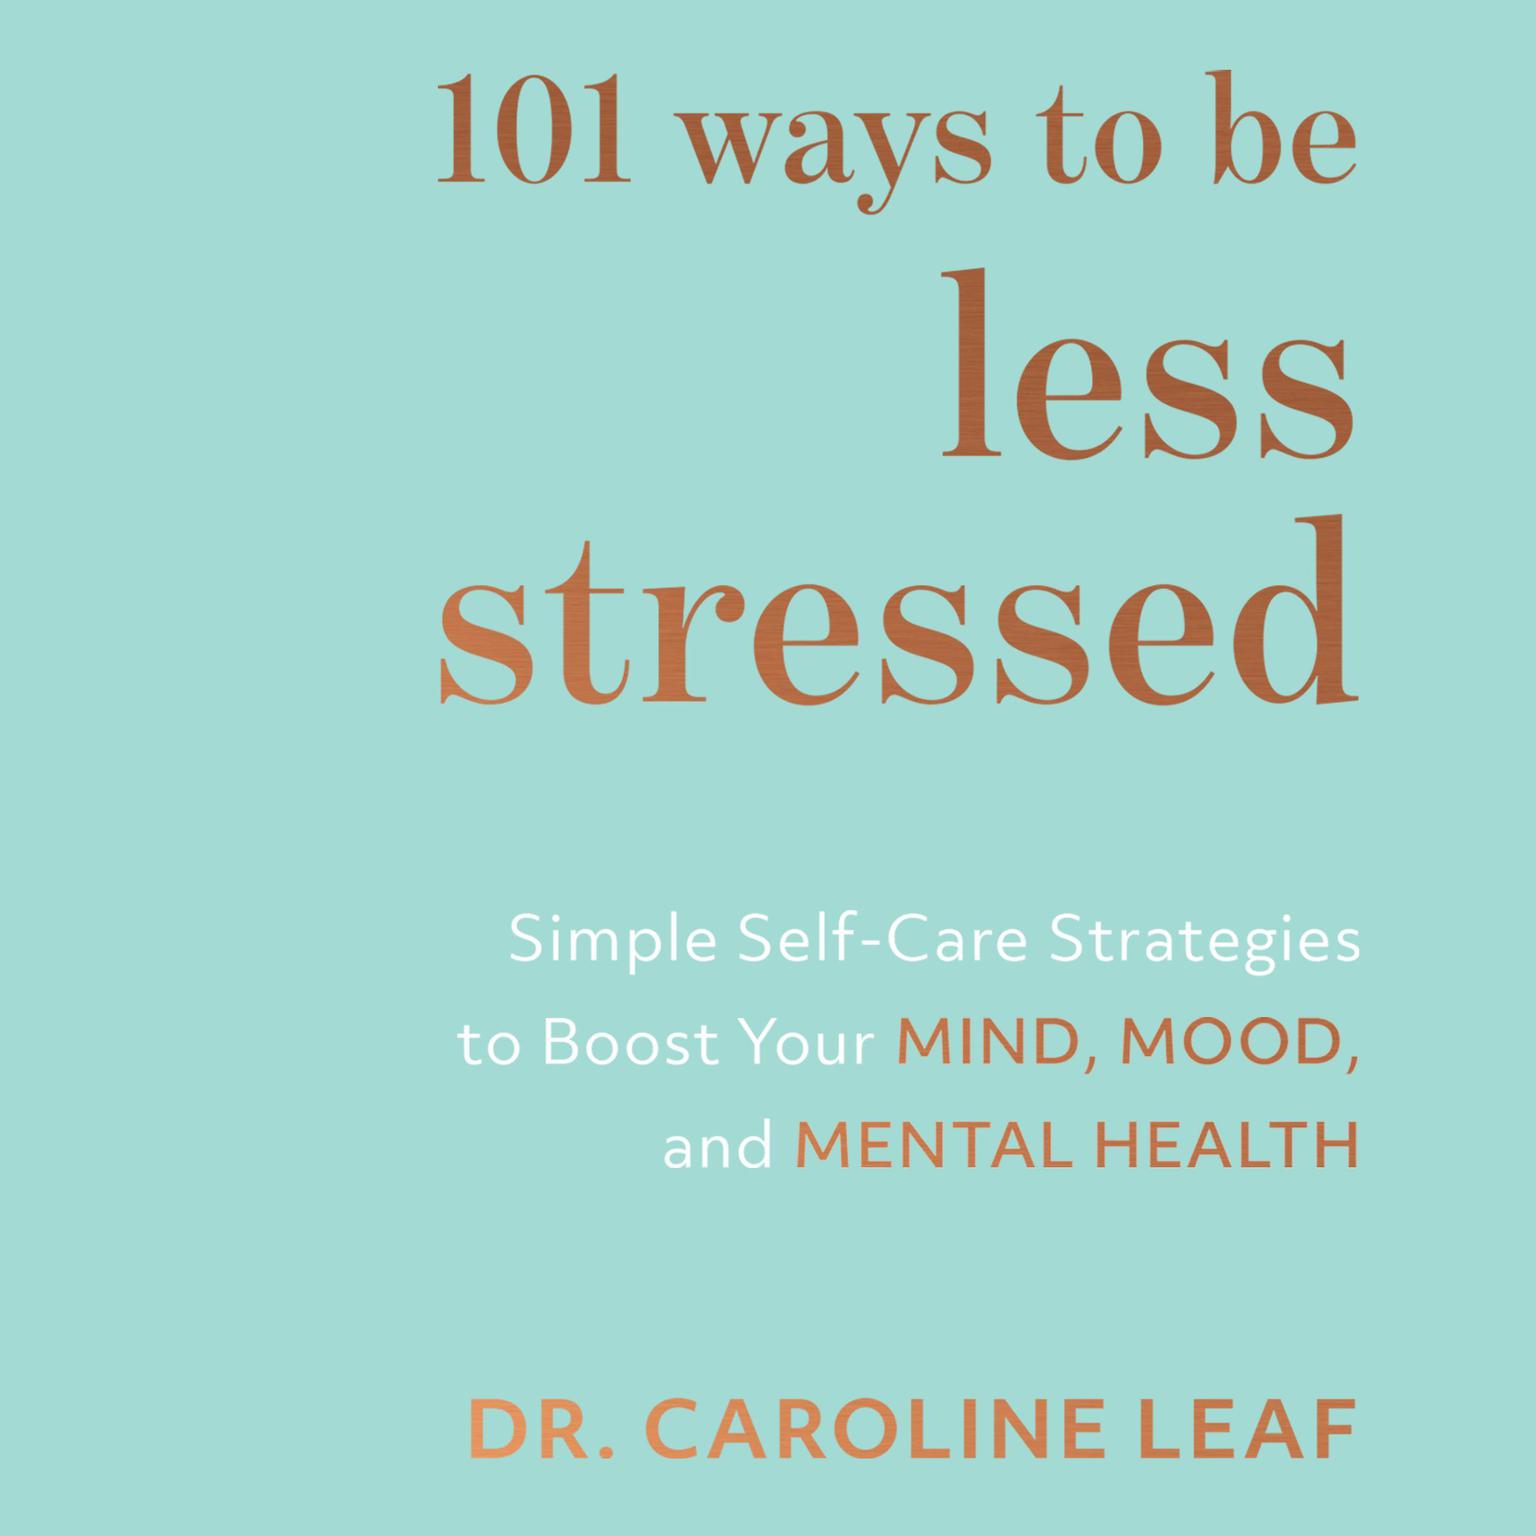 101 Ways to Be Less Stressed Audiobook by Caroline Leaf — Download Now